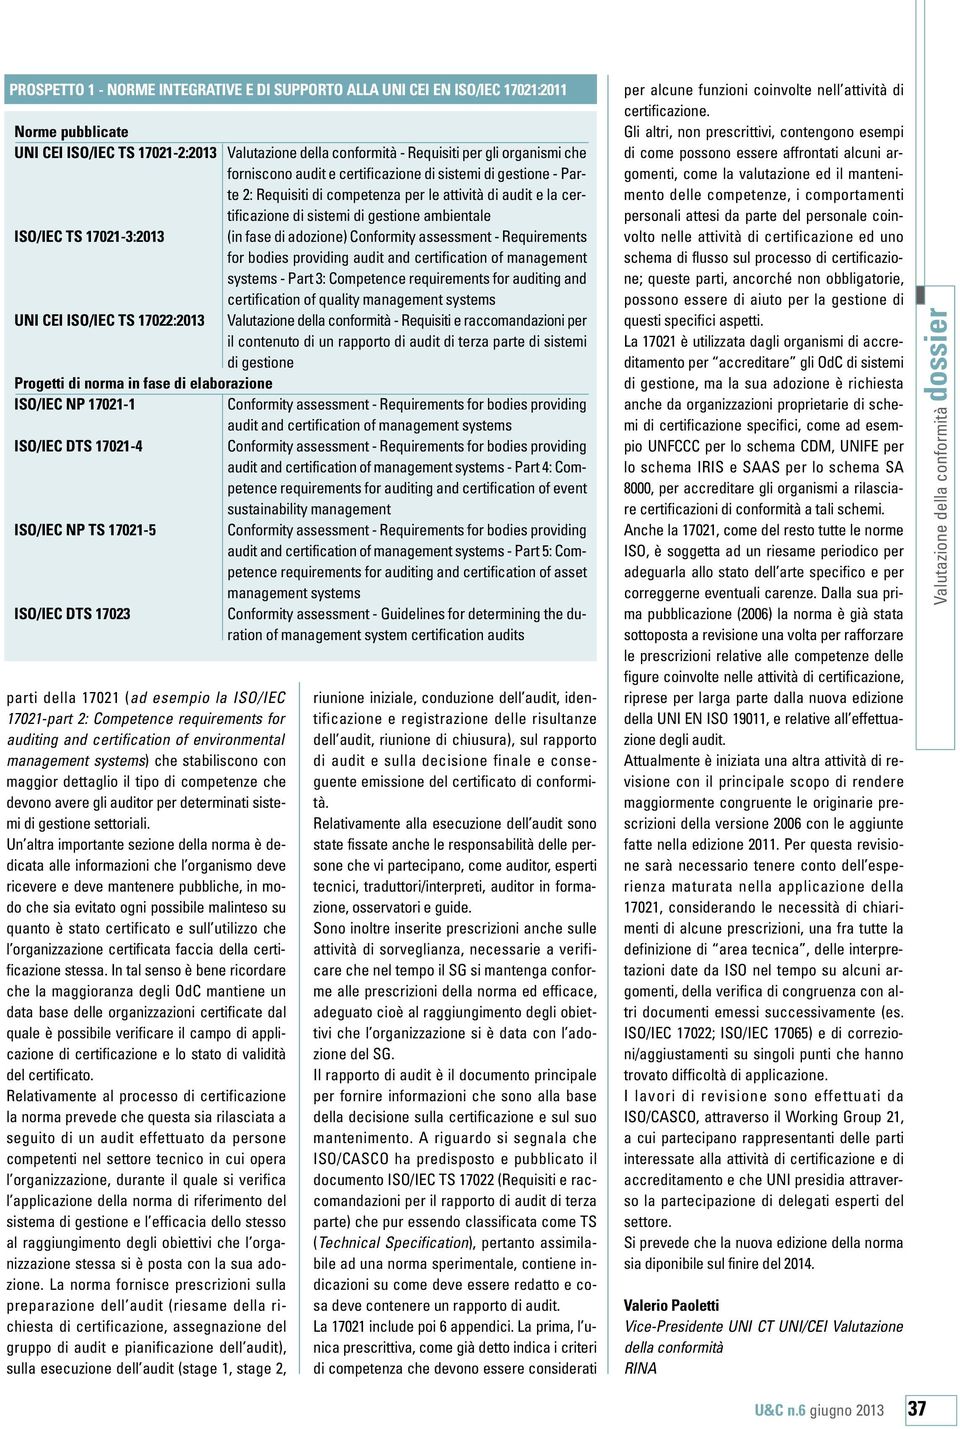 fase di adozione) Conformity assessment - Requirements for bodies providing audit and certification of management systems - Part 3: Competence requirements for auditing and certification of quality